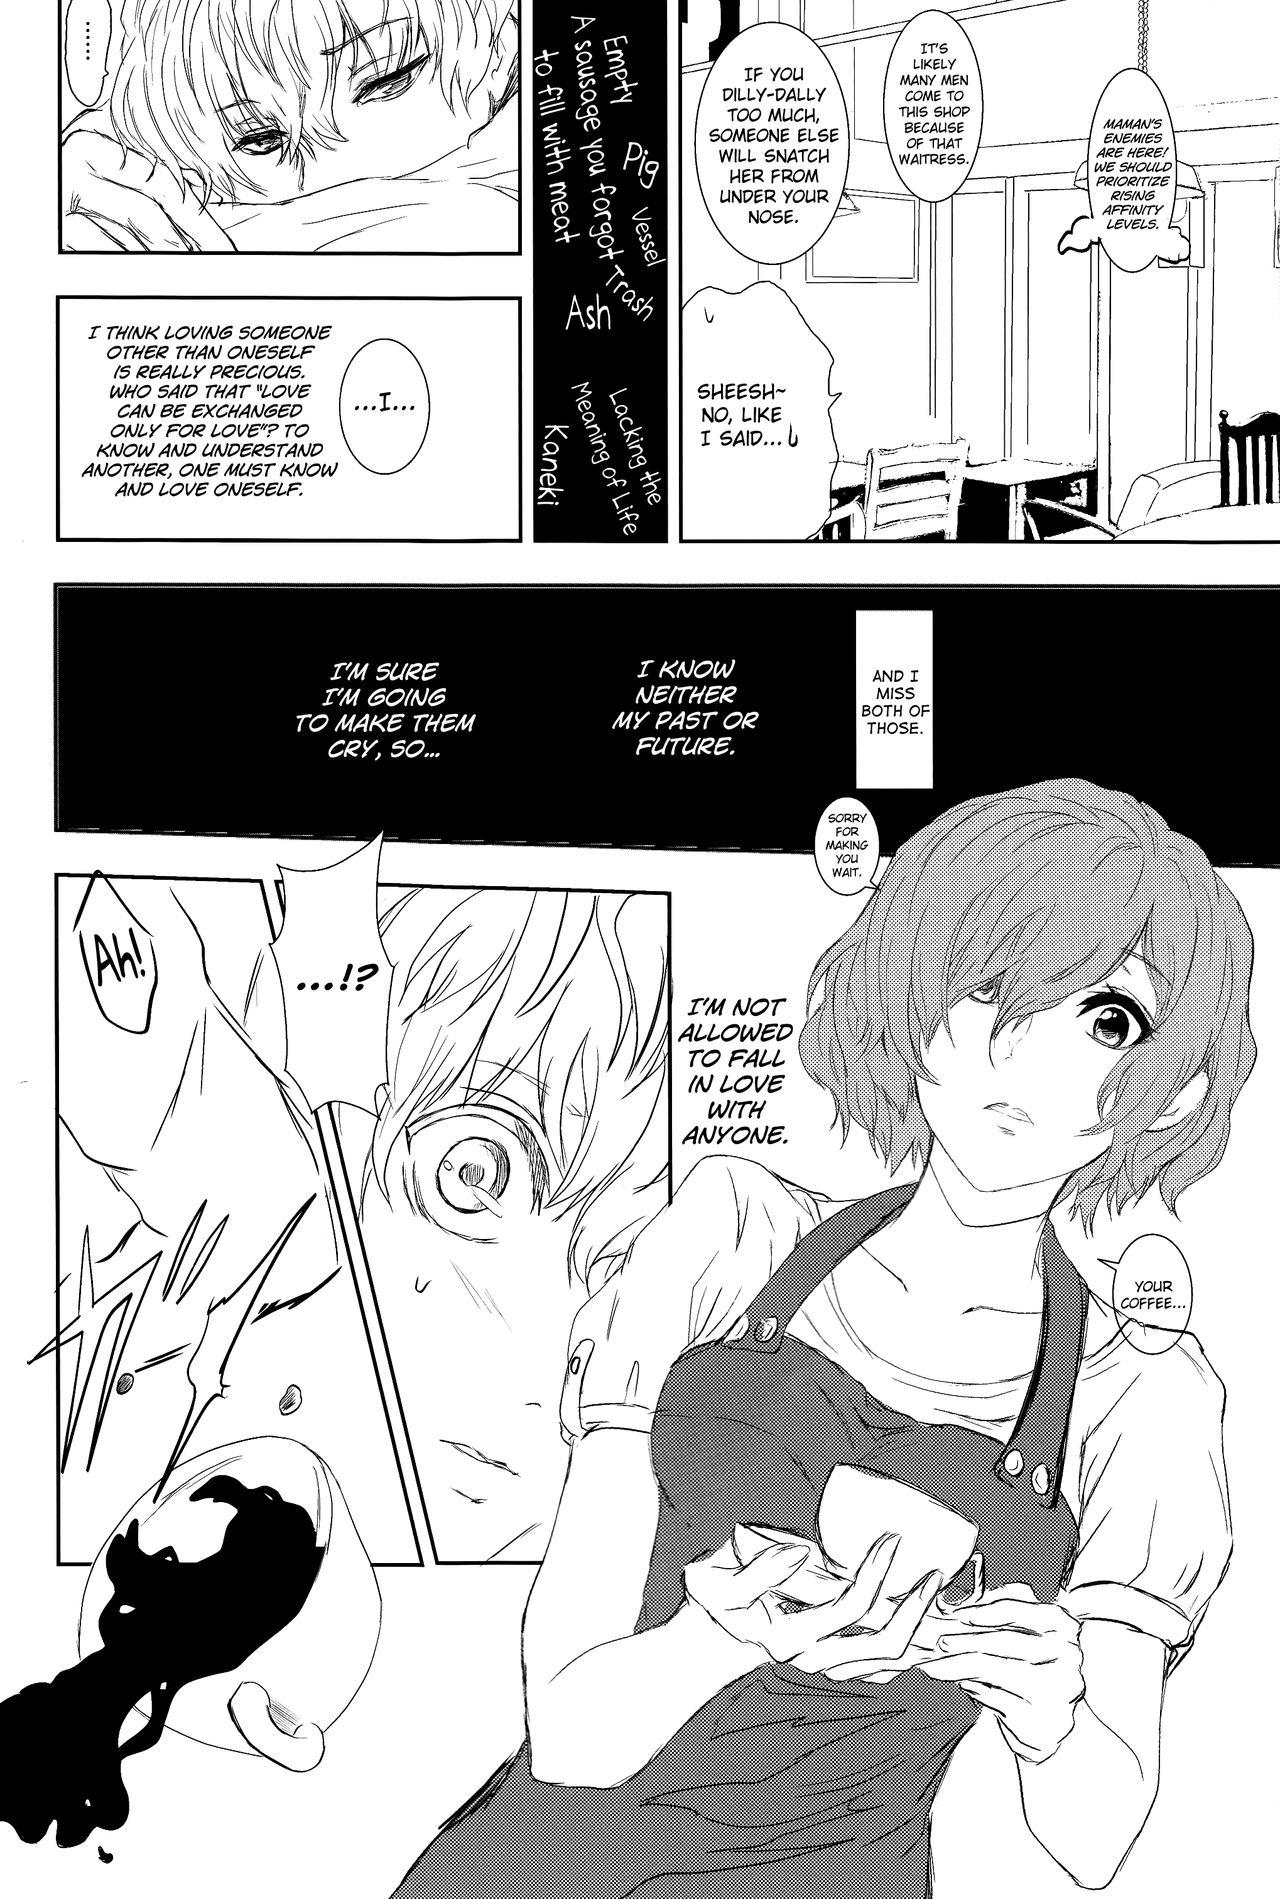 Bdsm Innocent Blue - Before Sunrise - Tokyo ghoul Hugecock - Page 8